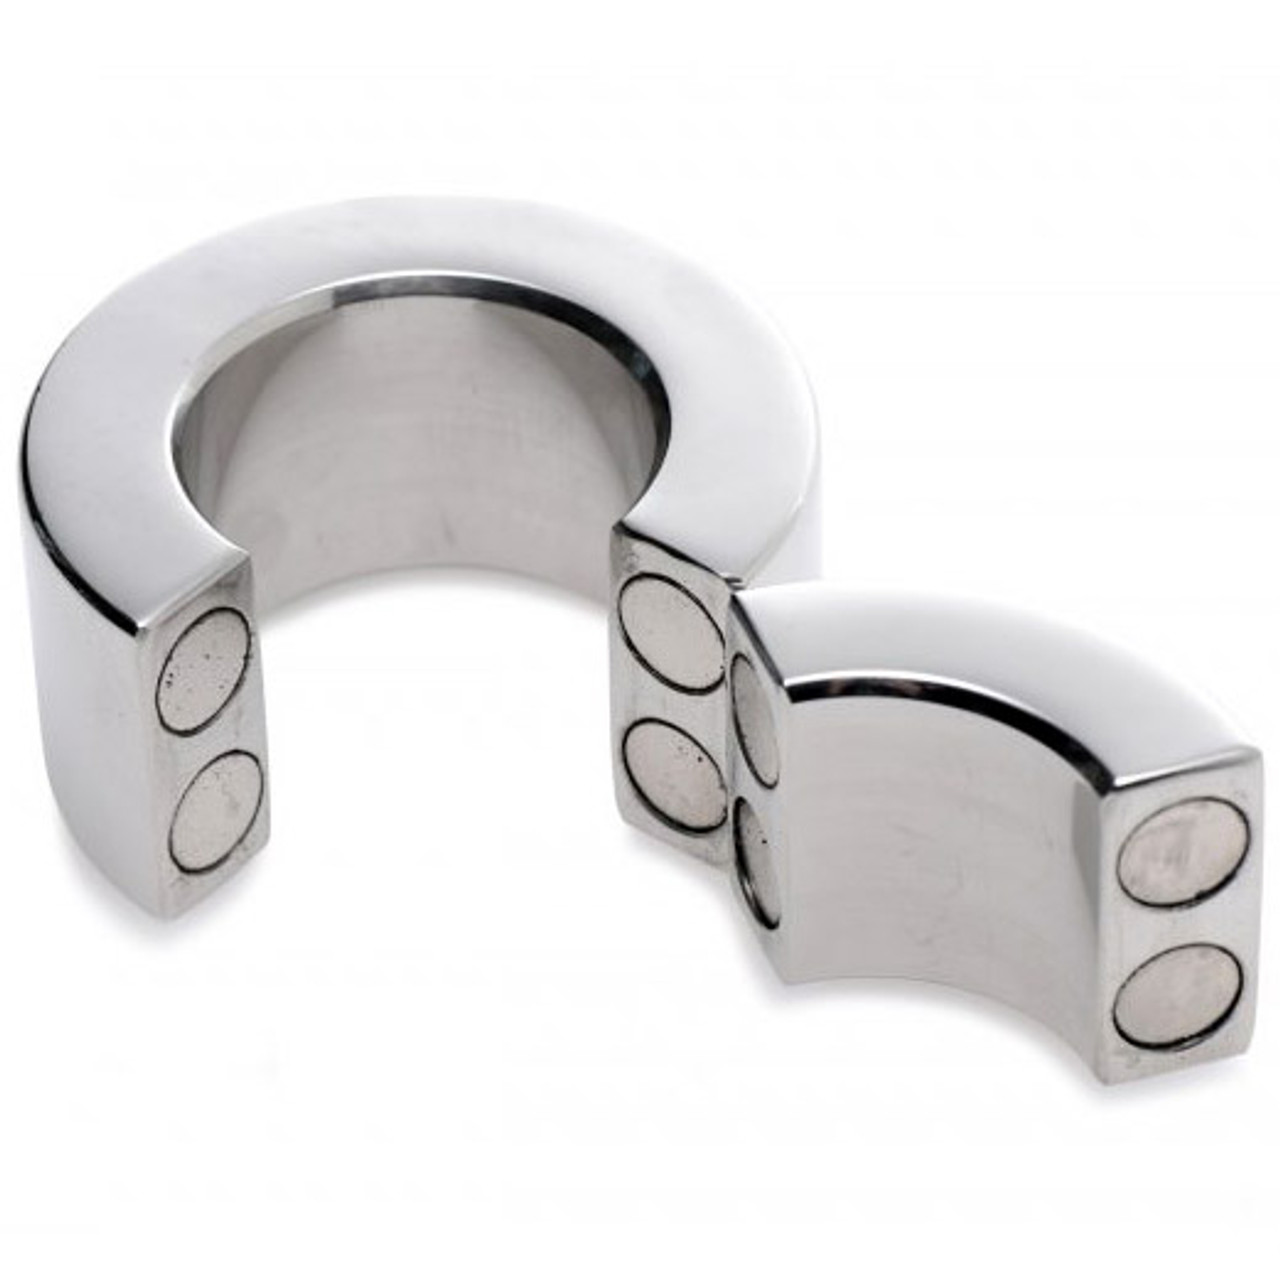 XR Brands Master Series Magnetic Stainless Steel 40mm Ball Stretcher